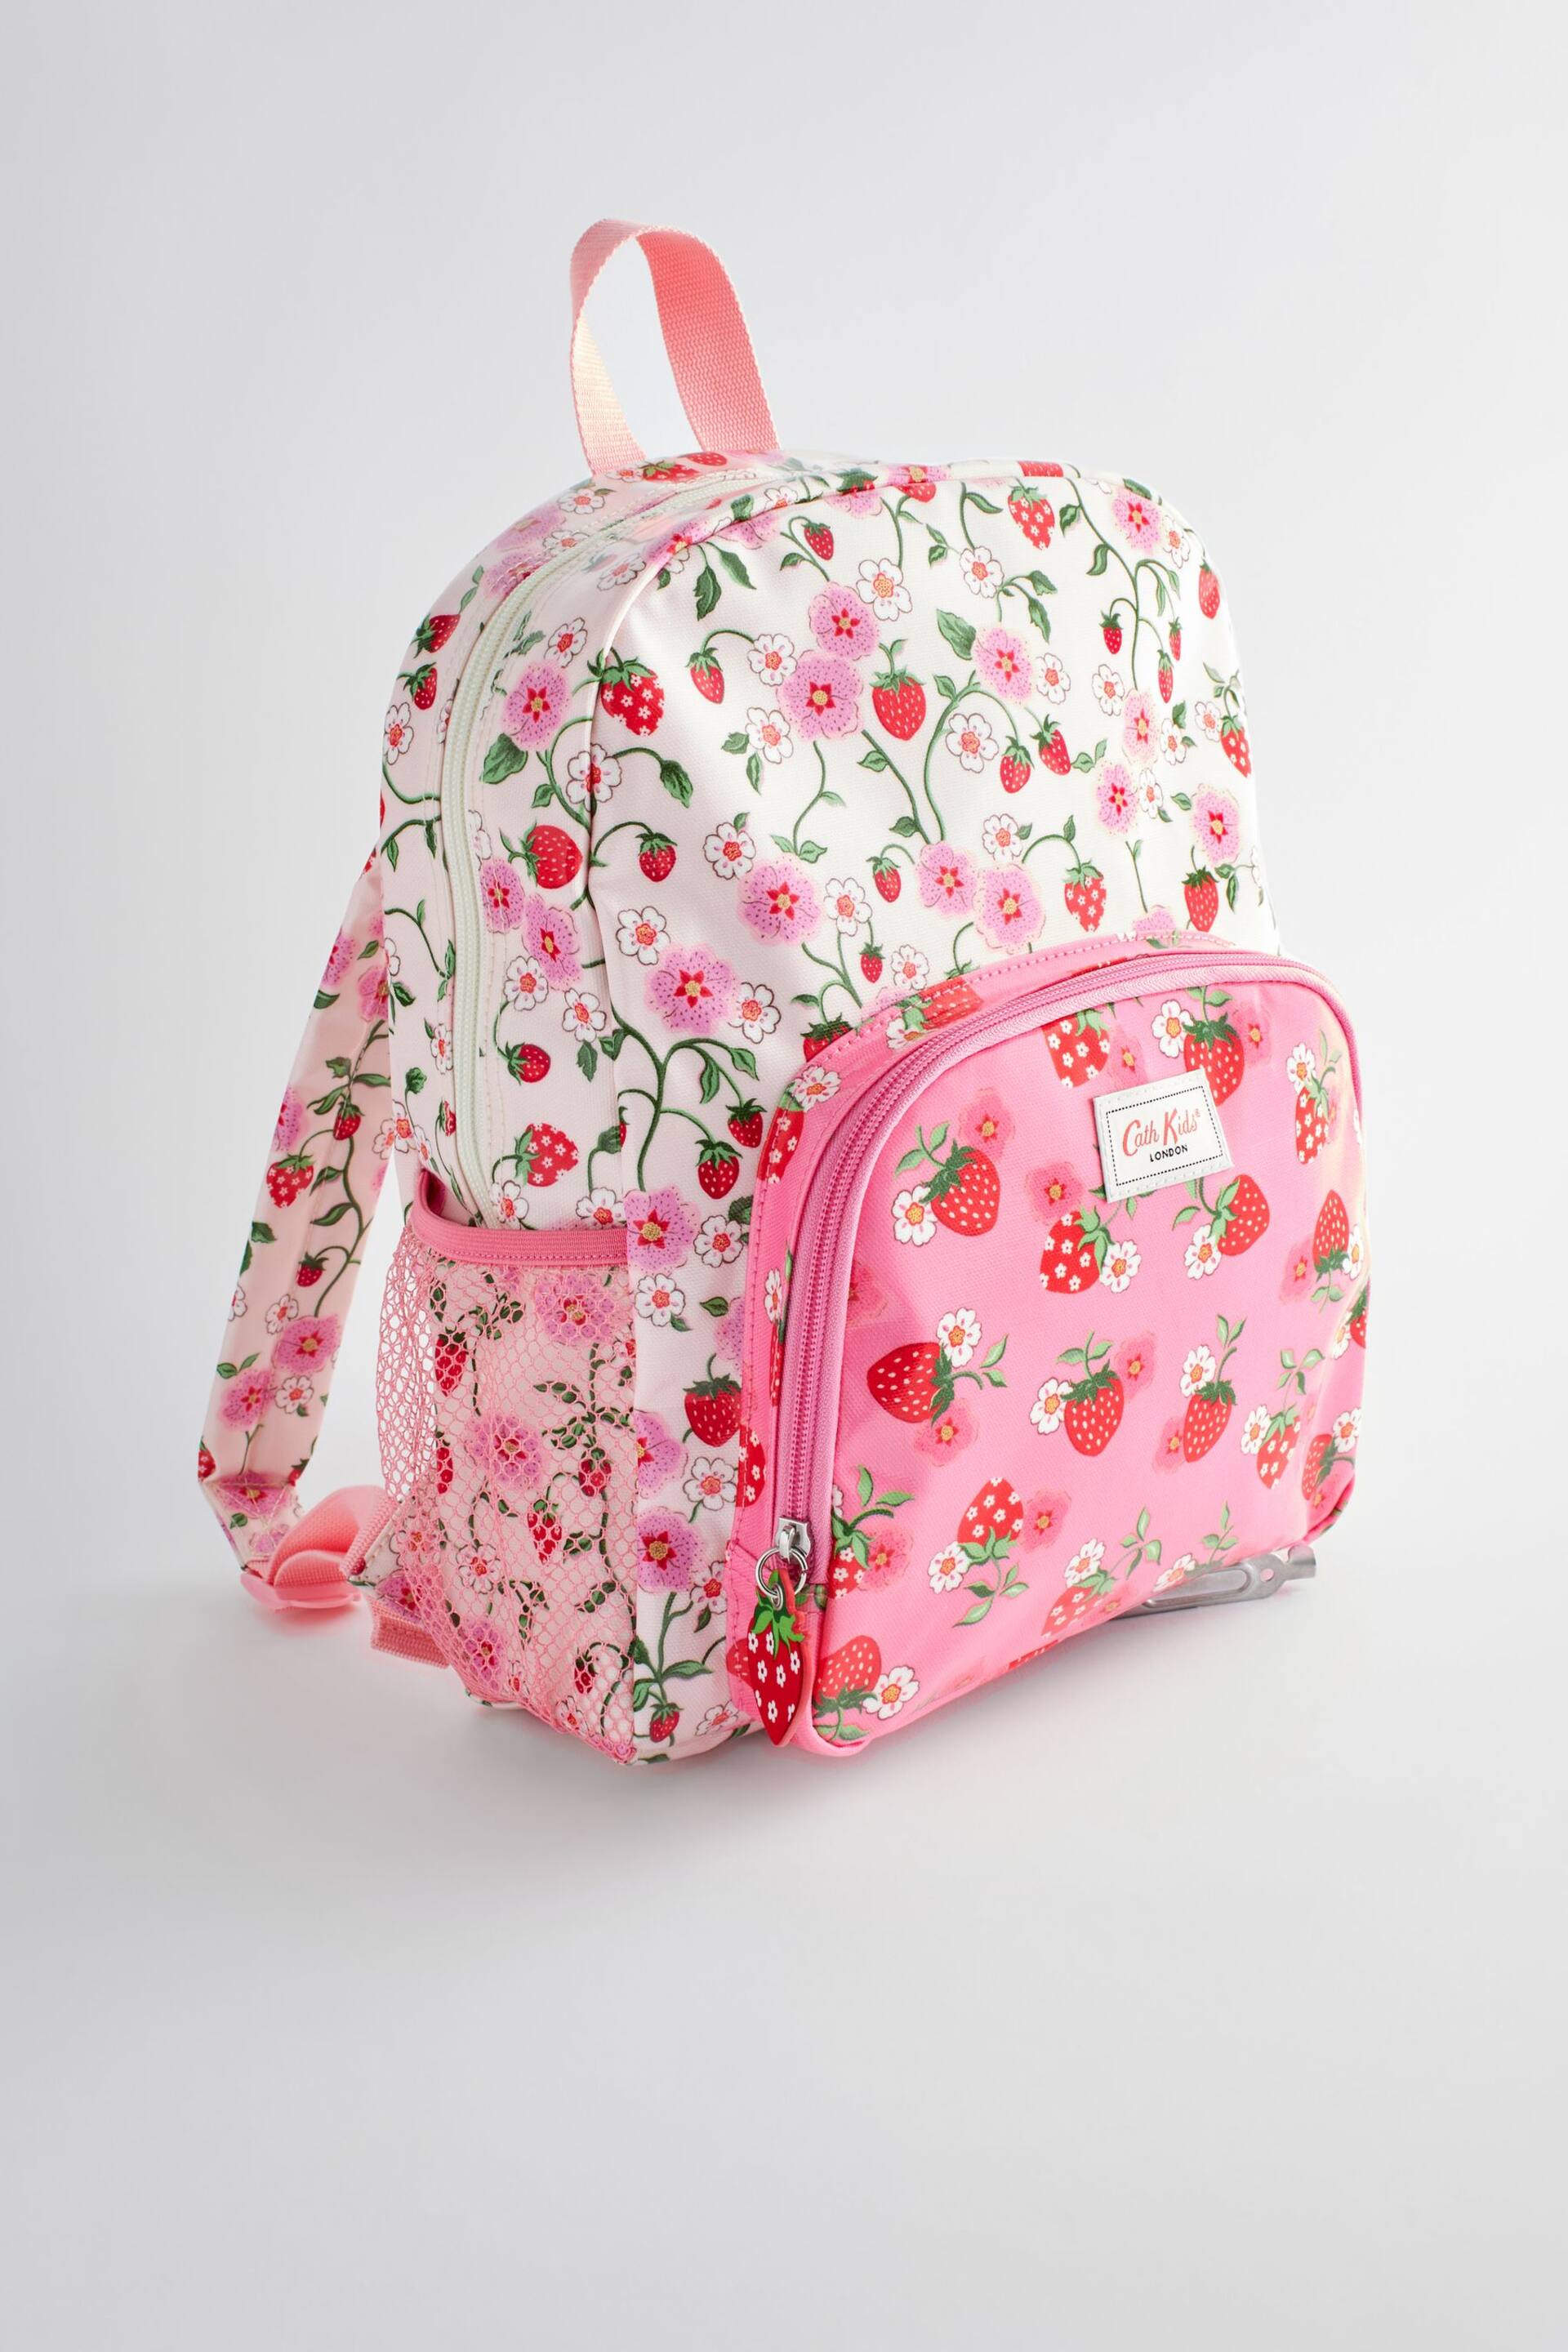 Cath Kidston Pink/White Floral Large Backpack - Image 1 of 12